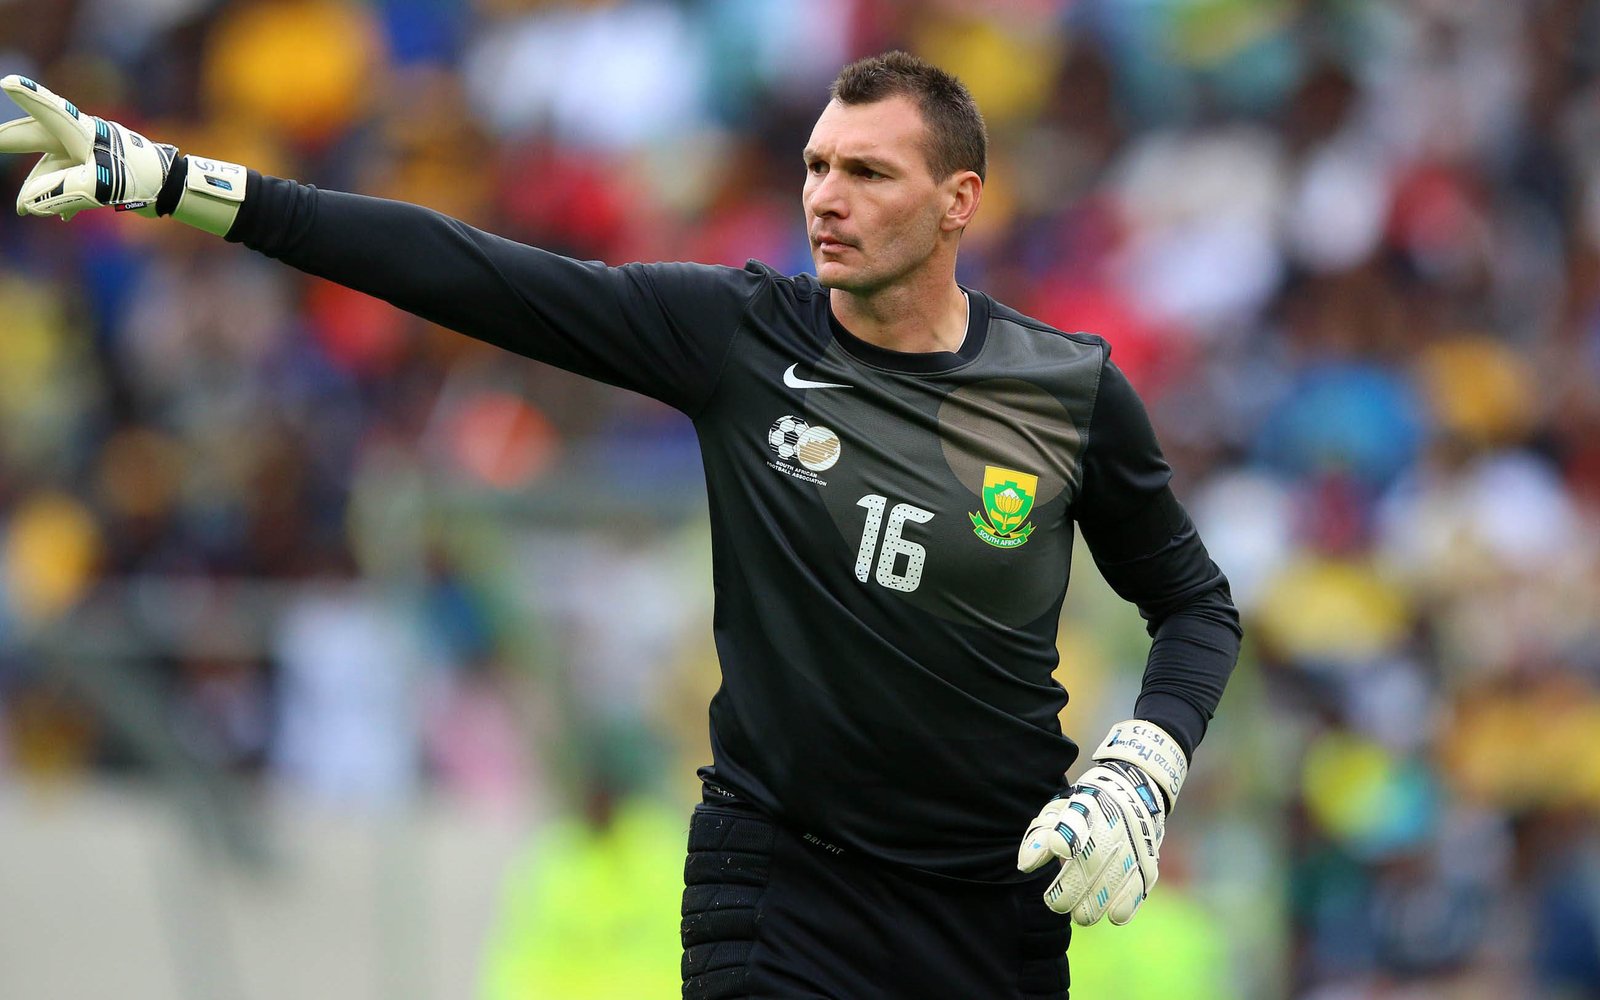 Darren Keet urges Banyana to make perfect laucnh in AFCON campaign - Sports Leo